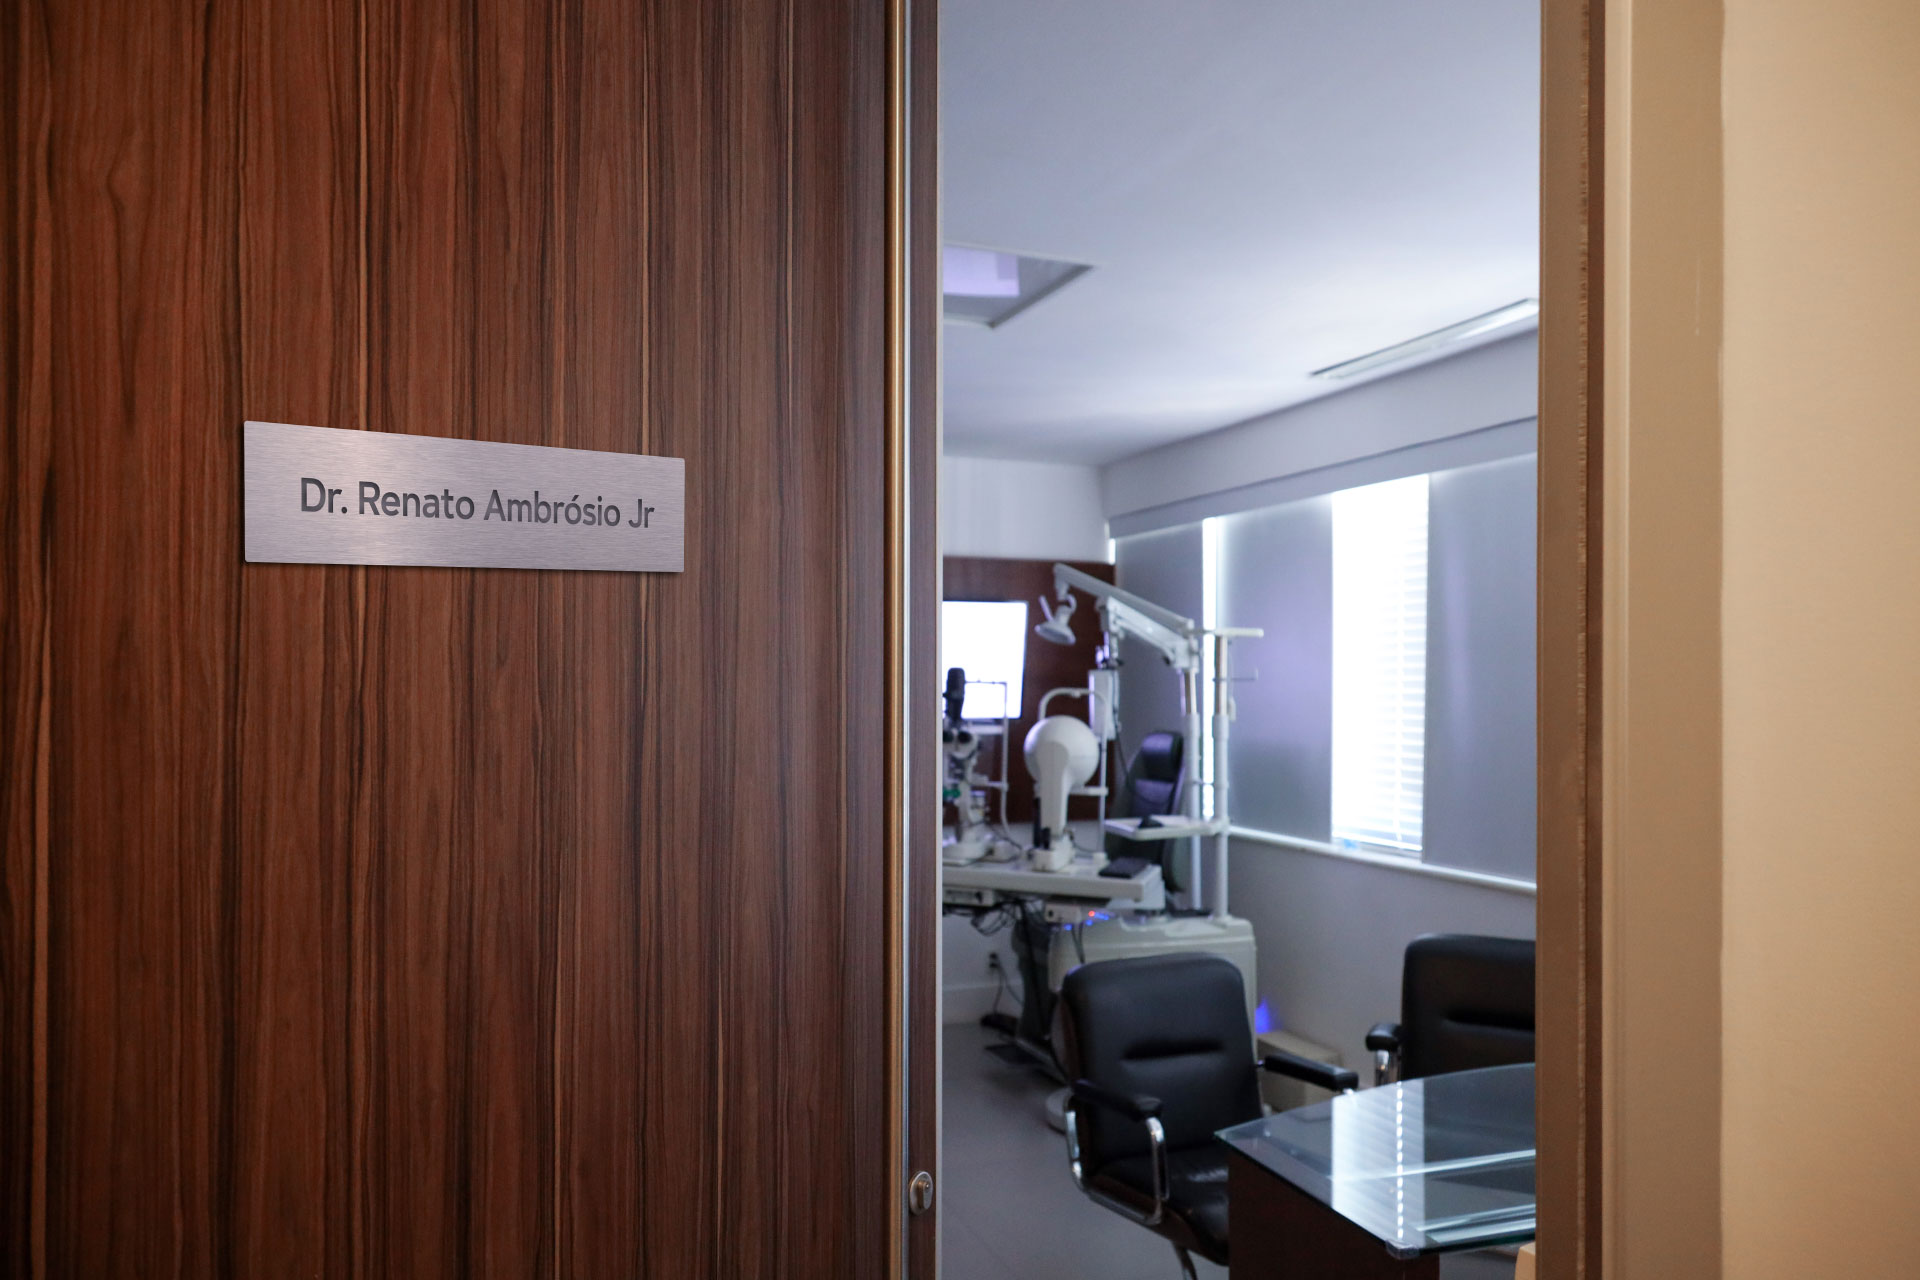 Entrance to the office of Prof Renato Ambrósio Jr.